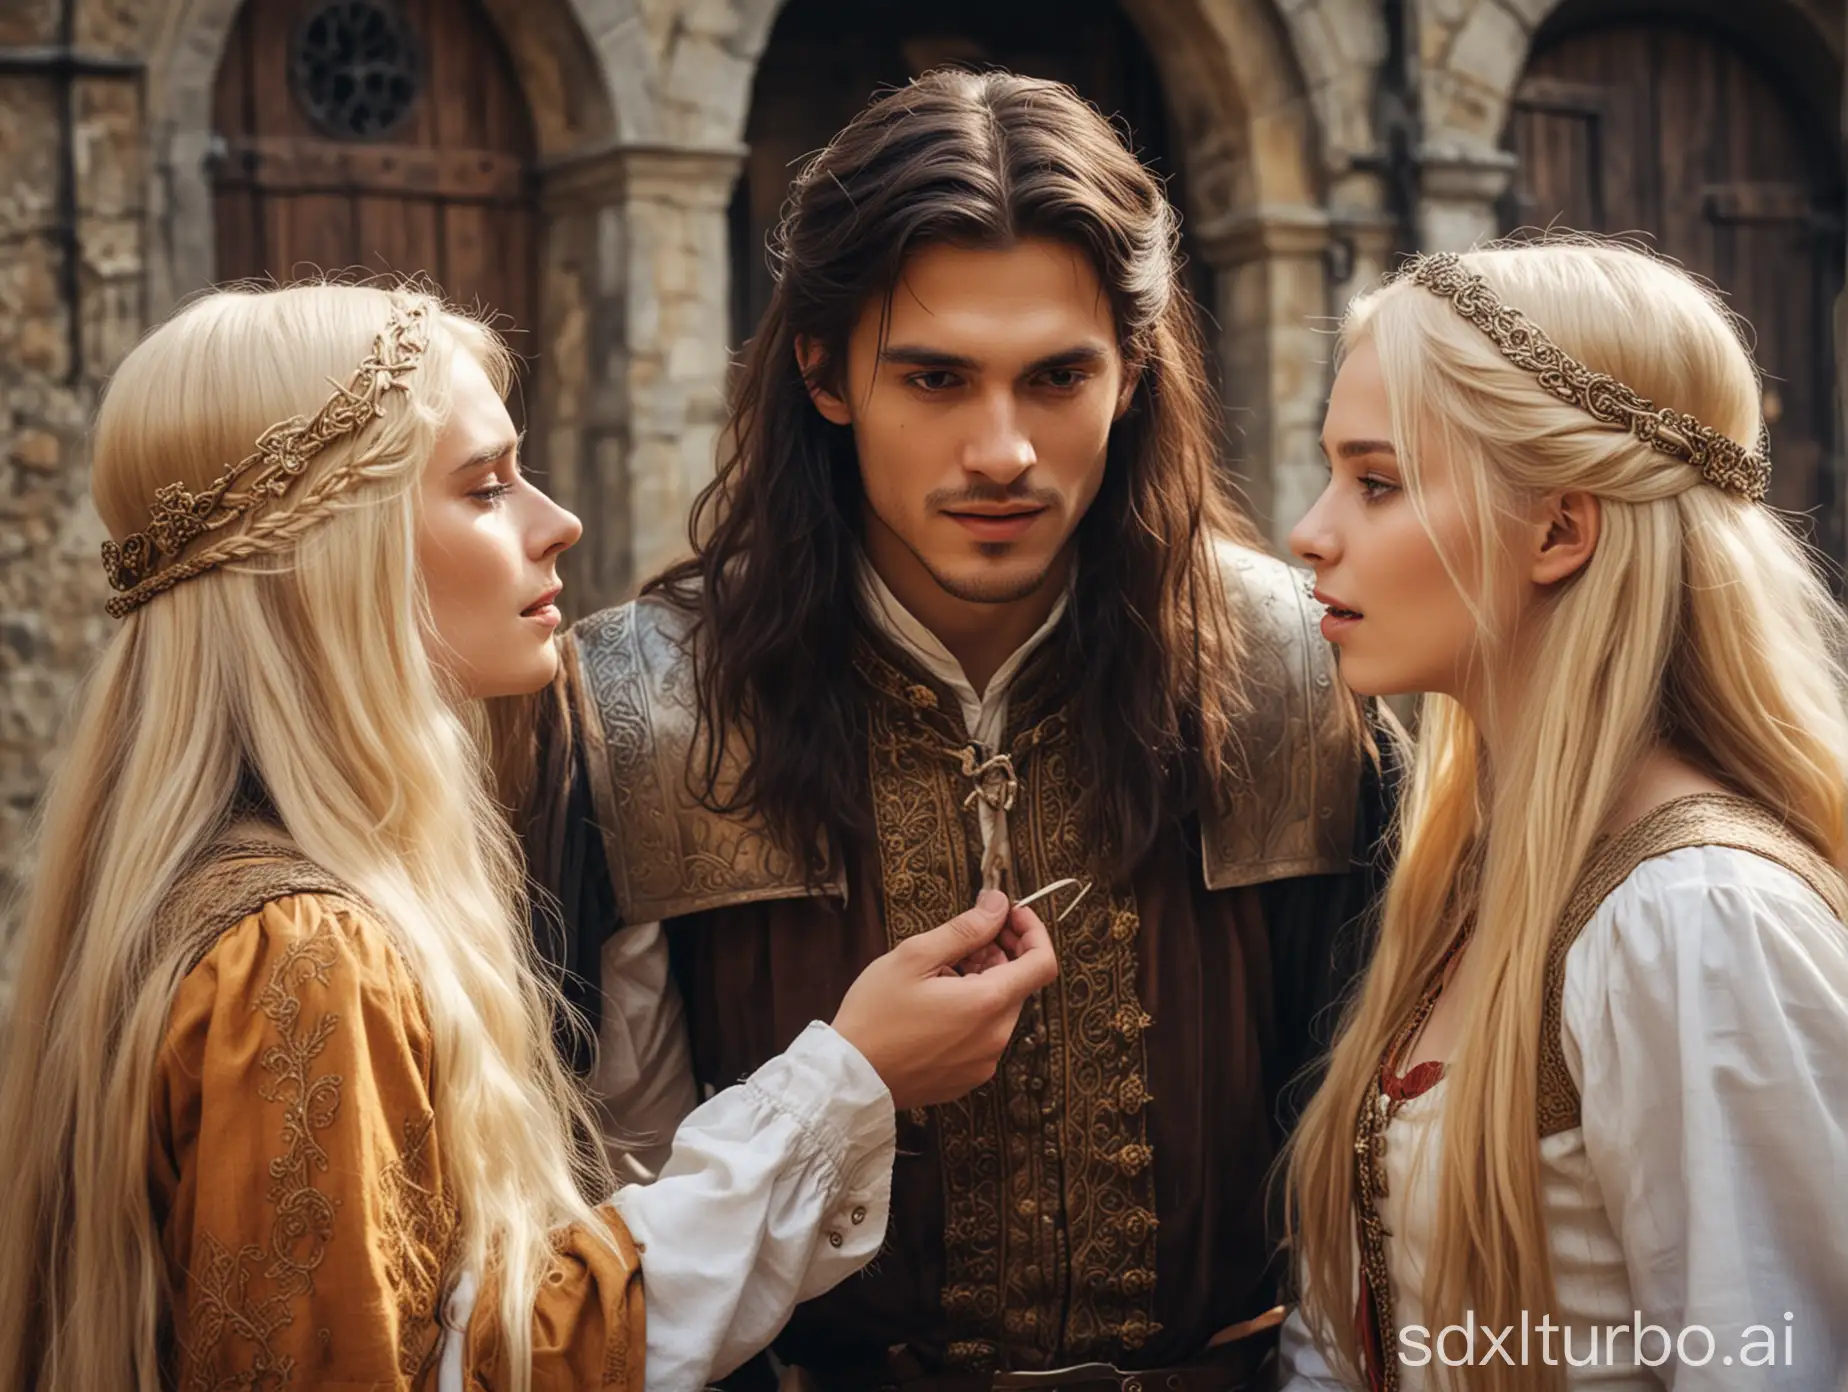 The long-haired guy communicates something to his friends - a guy with dark hair below his ears, a long-haired blonde and a girl with long russet hair . All dressed in medieval fantasy style.